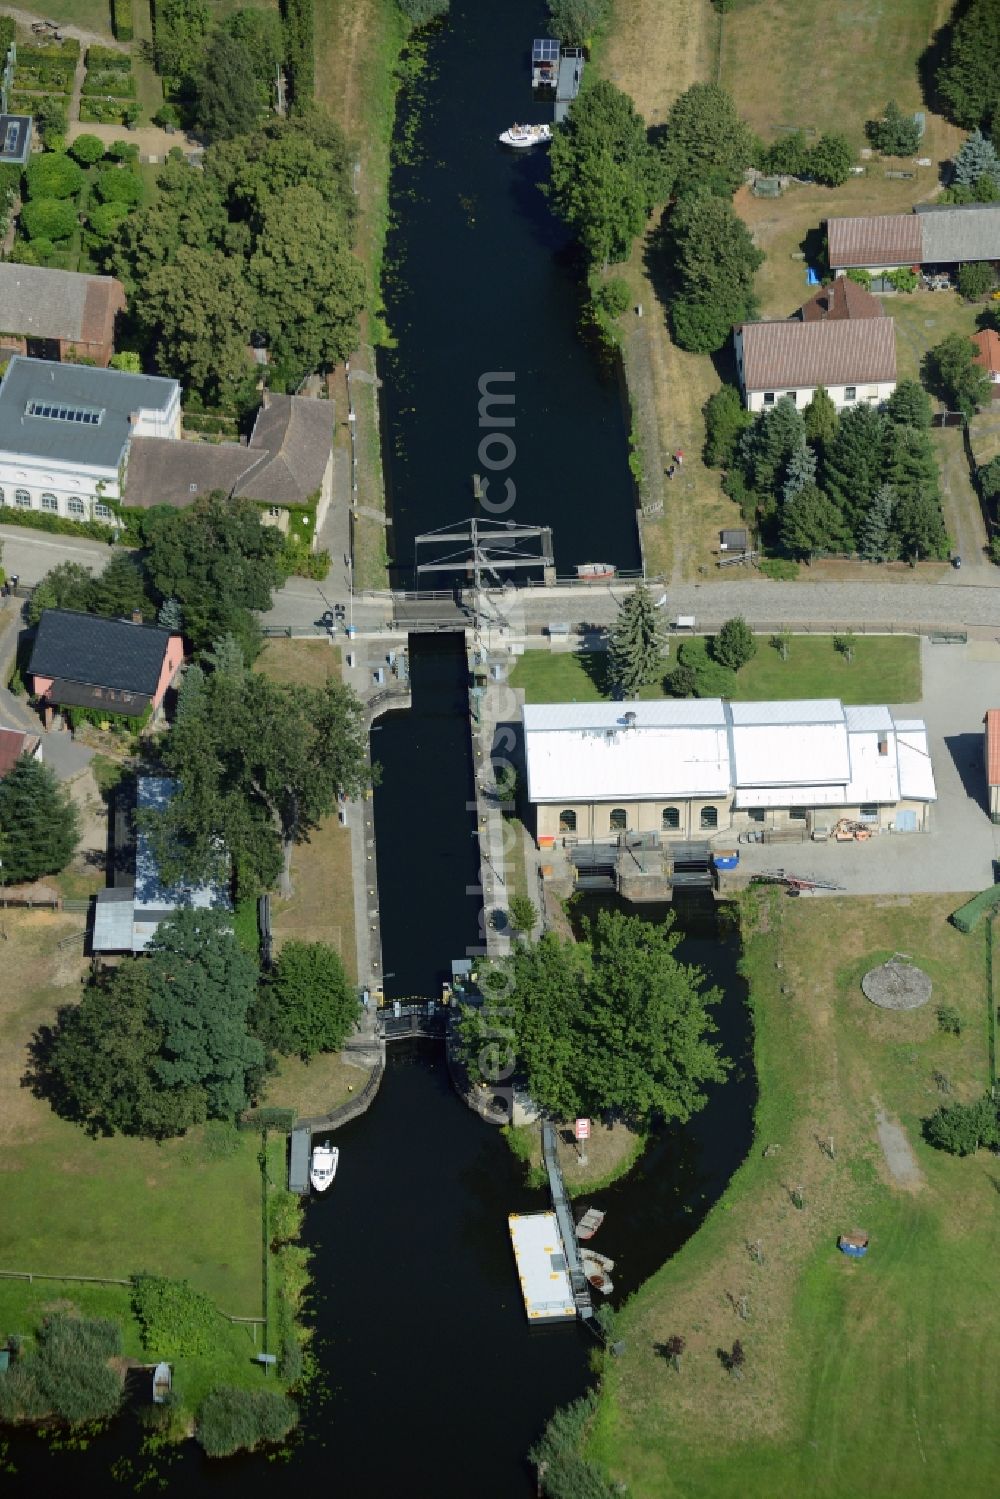 Aerial photograph Rietz-Neuendorf - Bridge, canal and watergate in the Neubrueck part of the borough of Rietz-Neuendorf in the state of Brandenburg. The facilities are located on the Northern shore of lake Wergensee